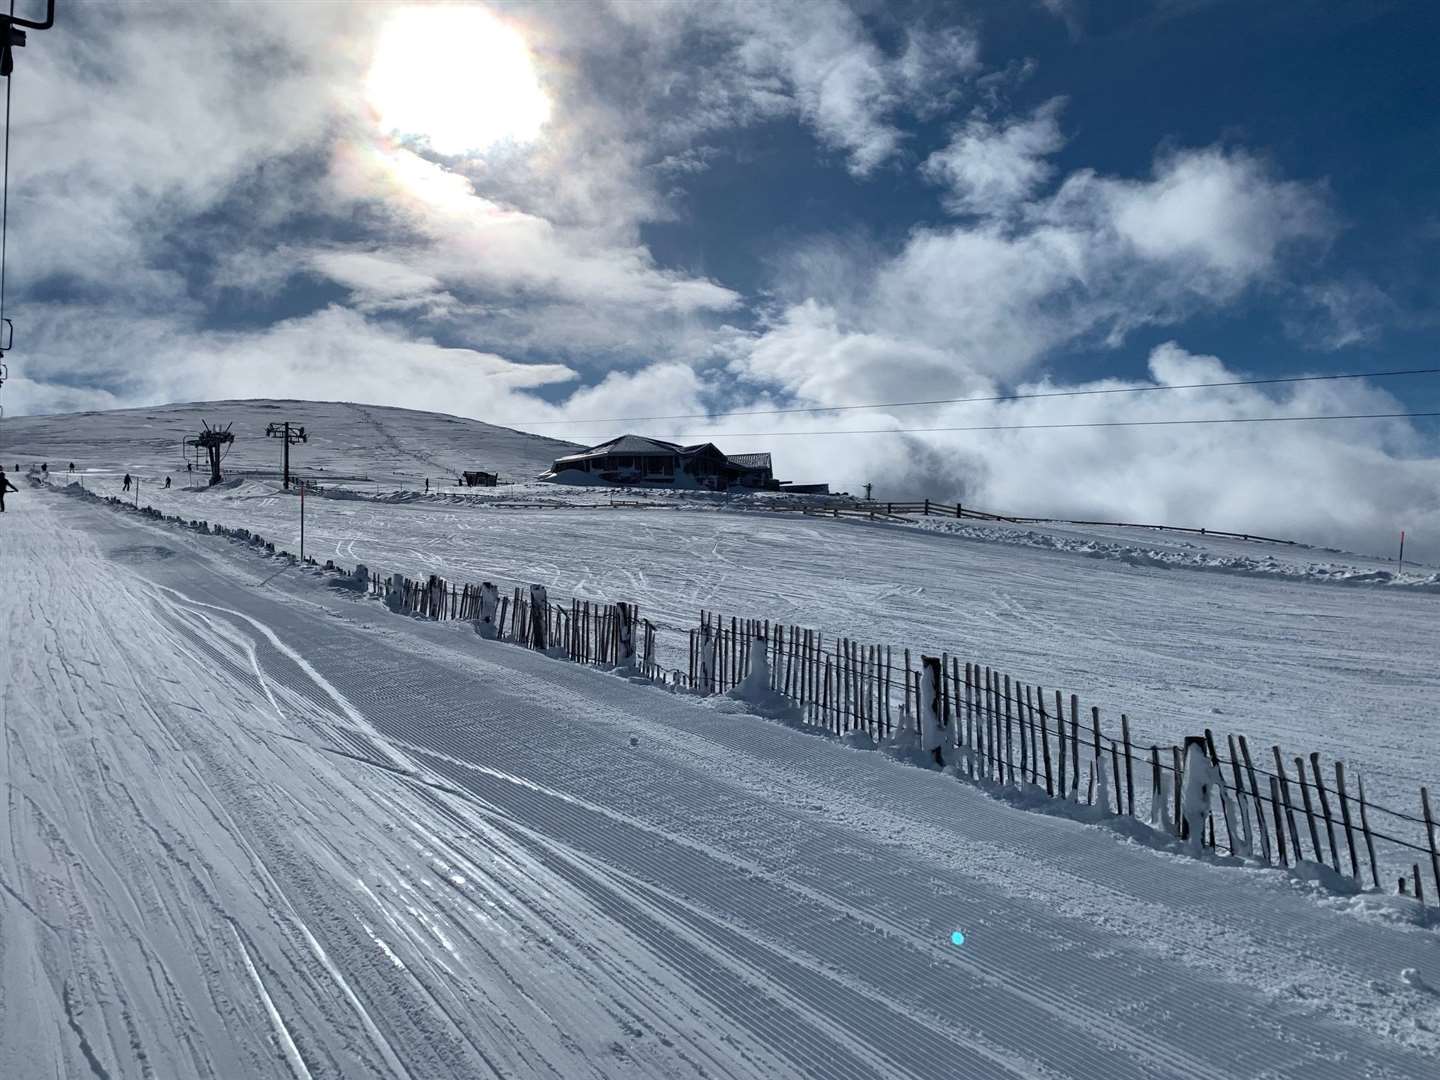 The Cairngorm ski resort on the last day of the season before it was curtailed by the coronavirus outrbreak.